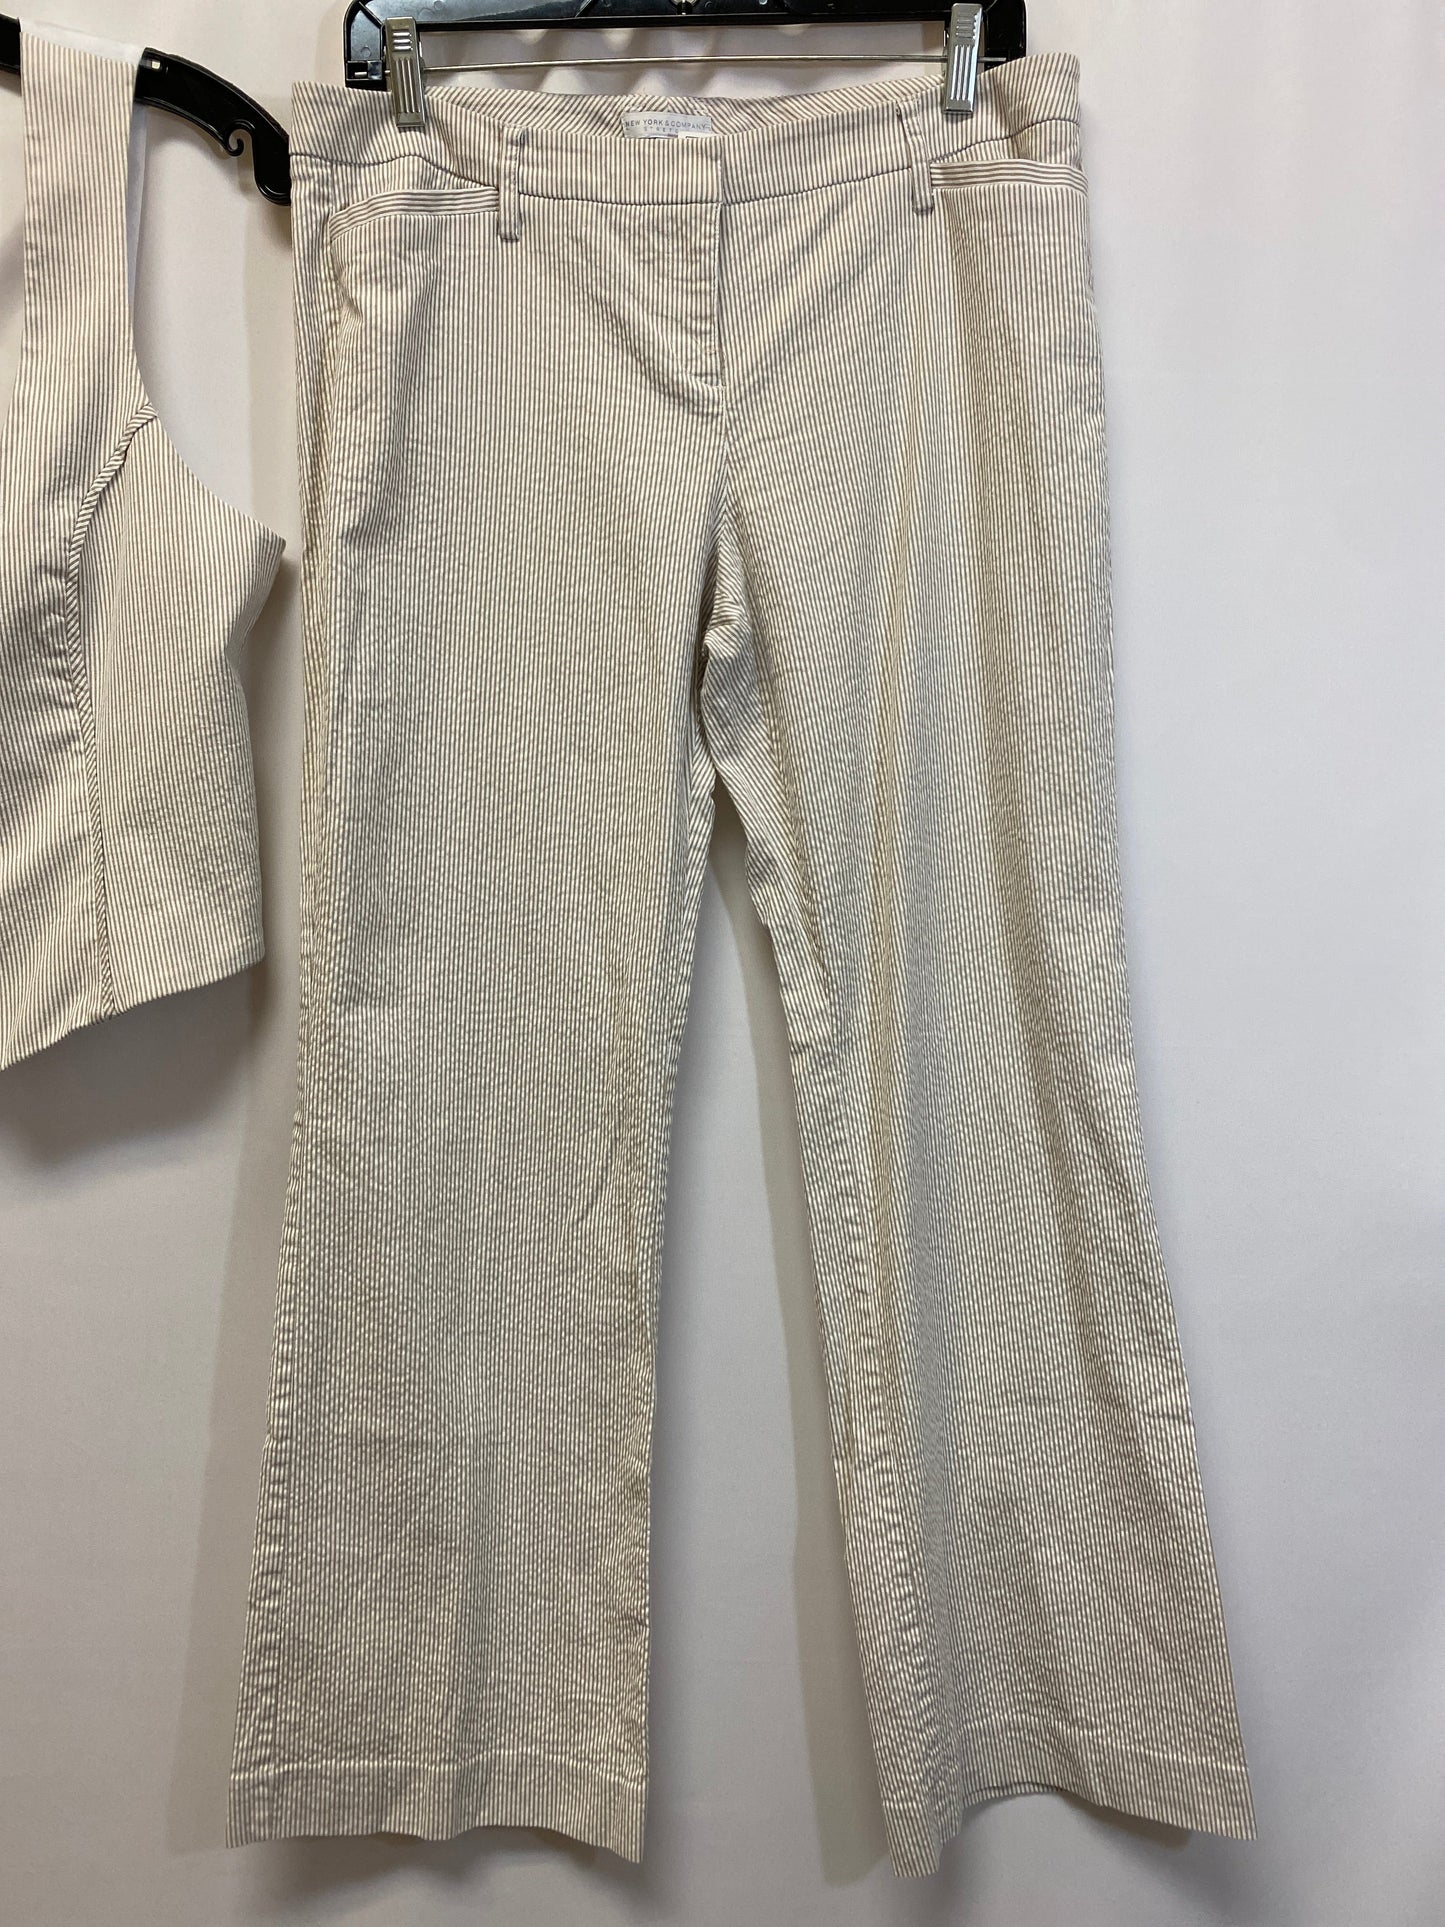 Tan Pants Suit 2pc New York And Co, Size 12